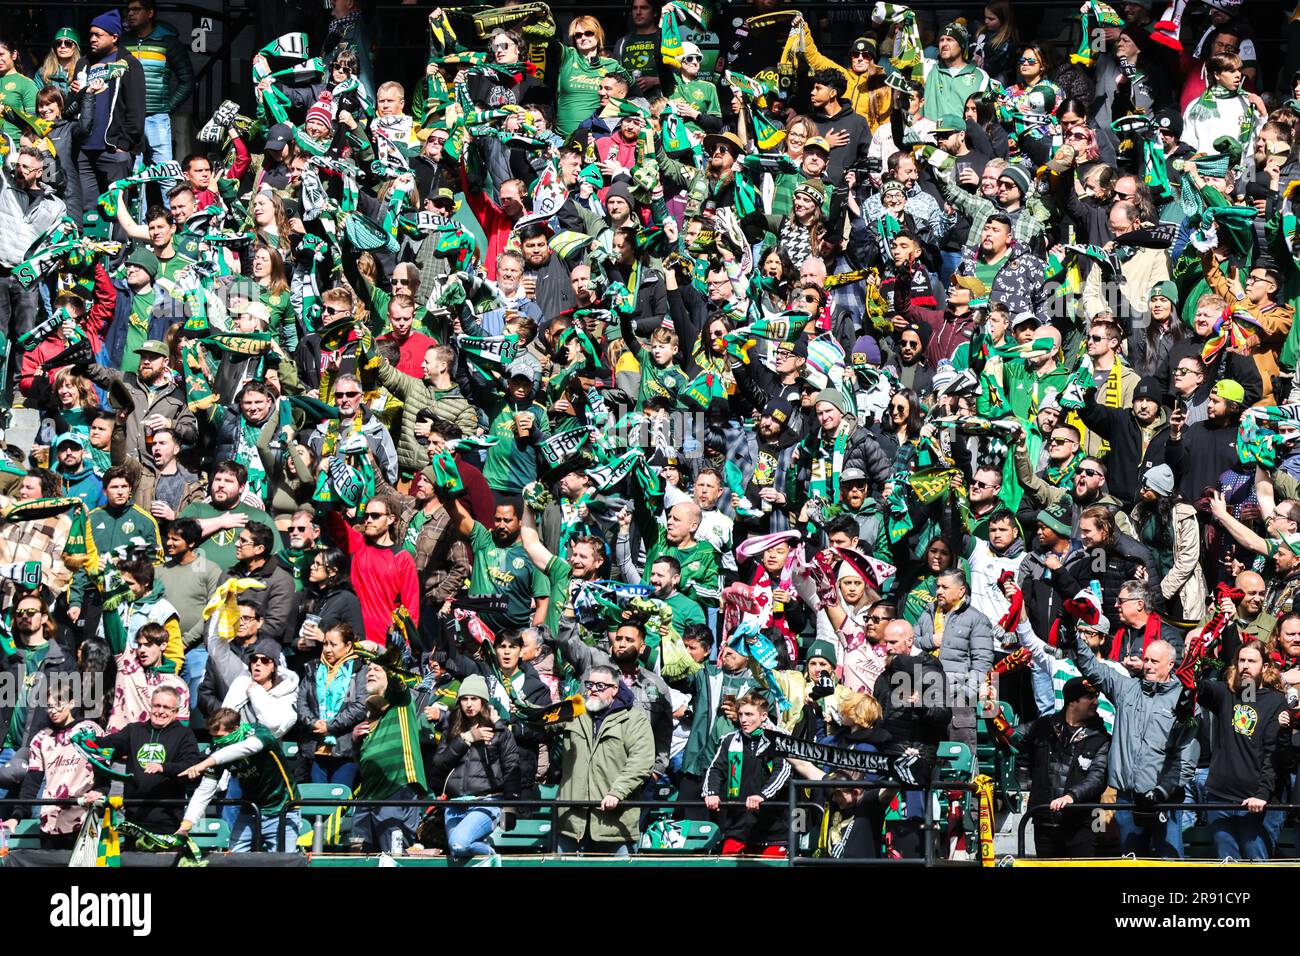 From the Stands  Fans new and old unite to cheer on the Timbers